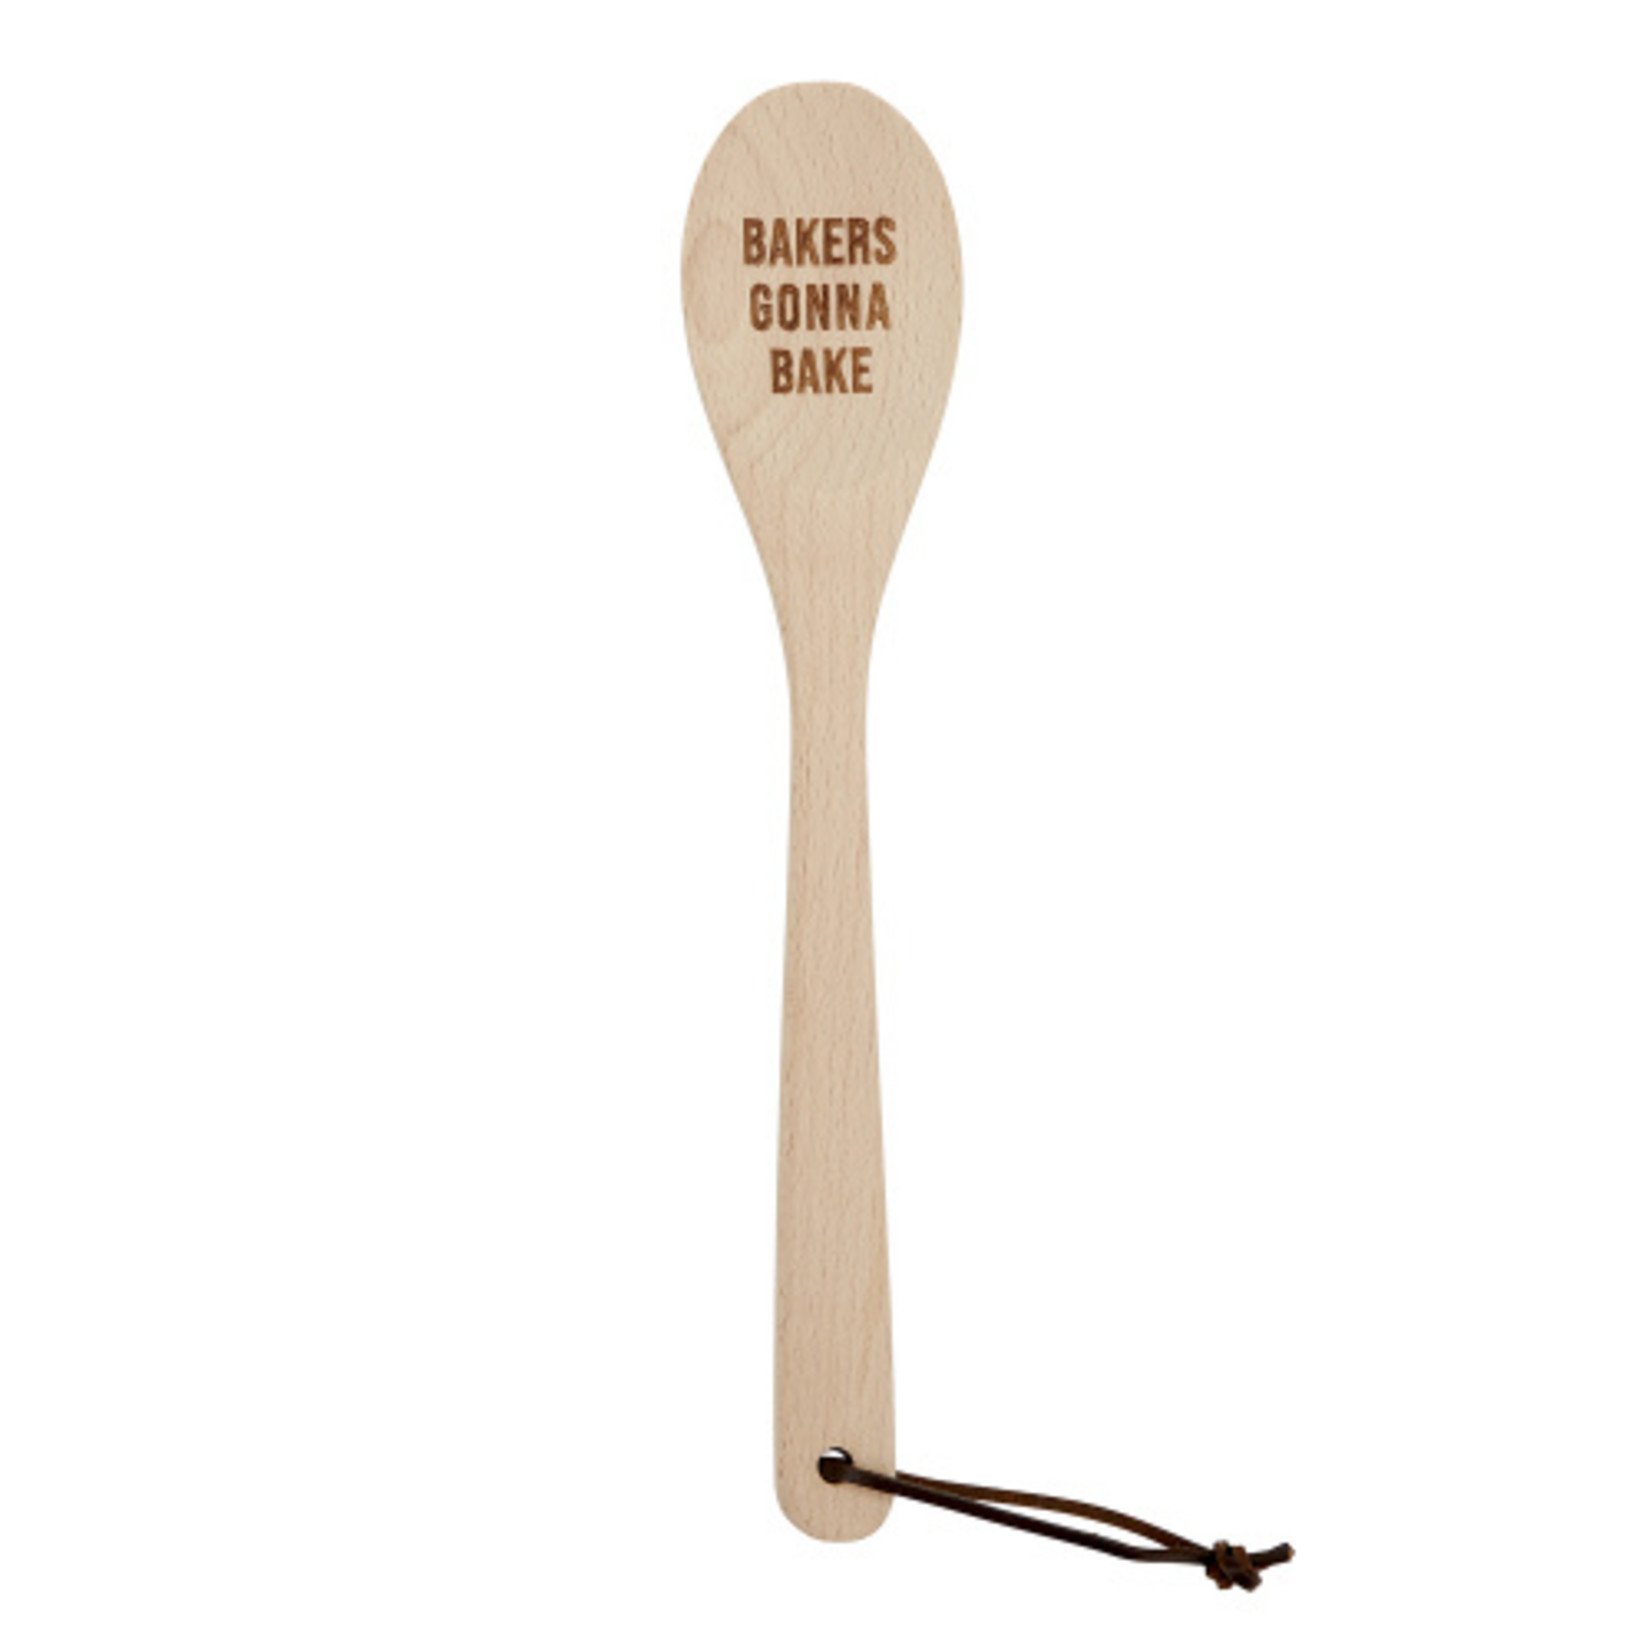 Creative Brands Bakers Gonna Bake Wooden Spoon